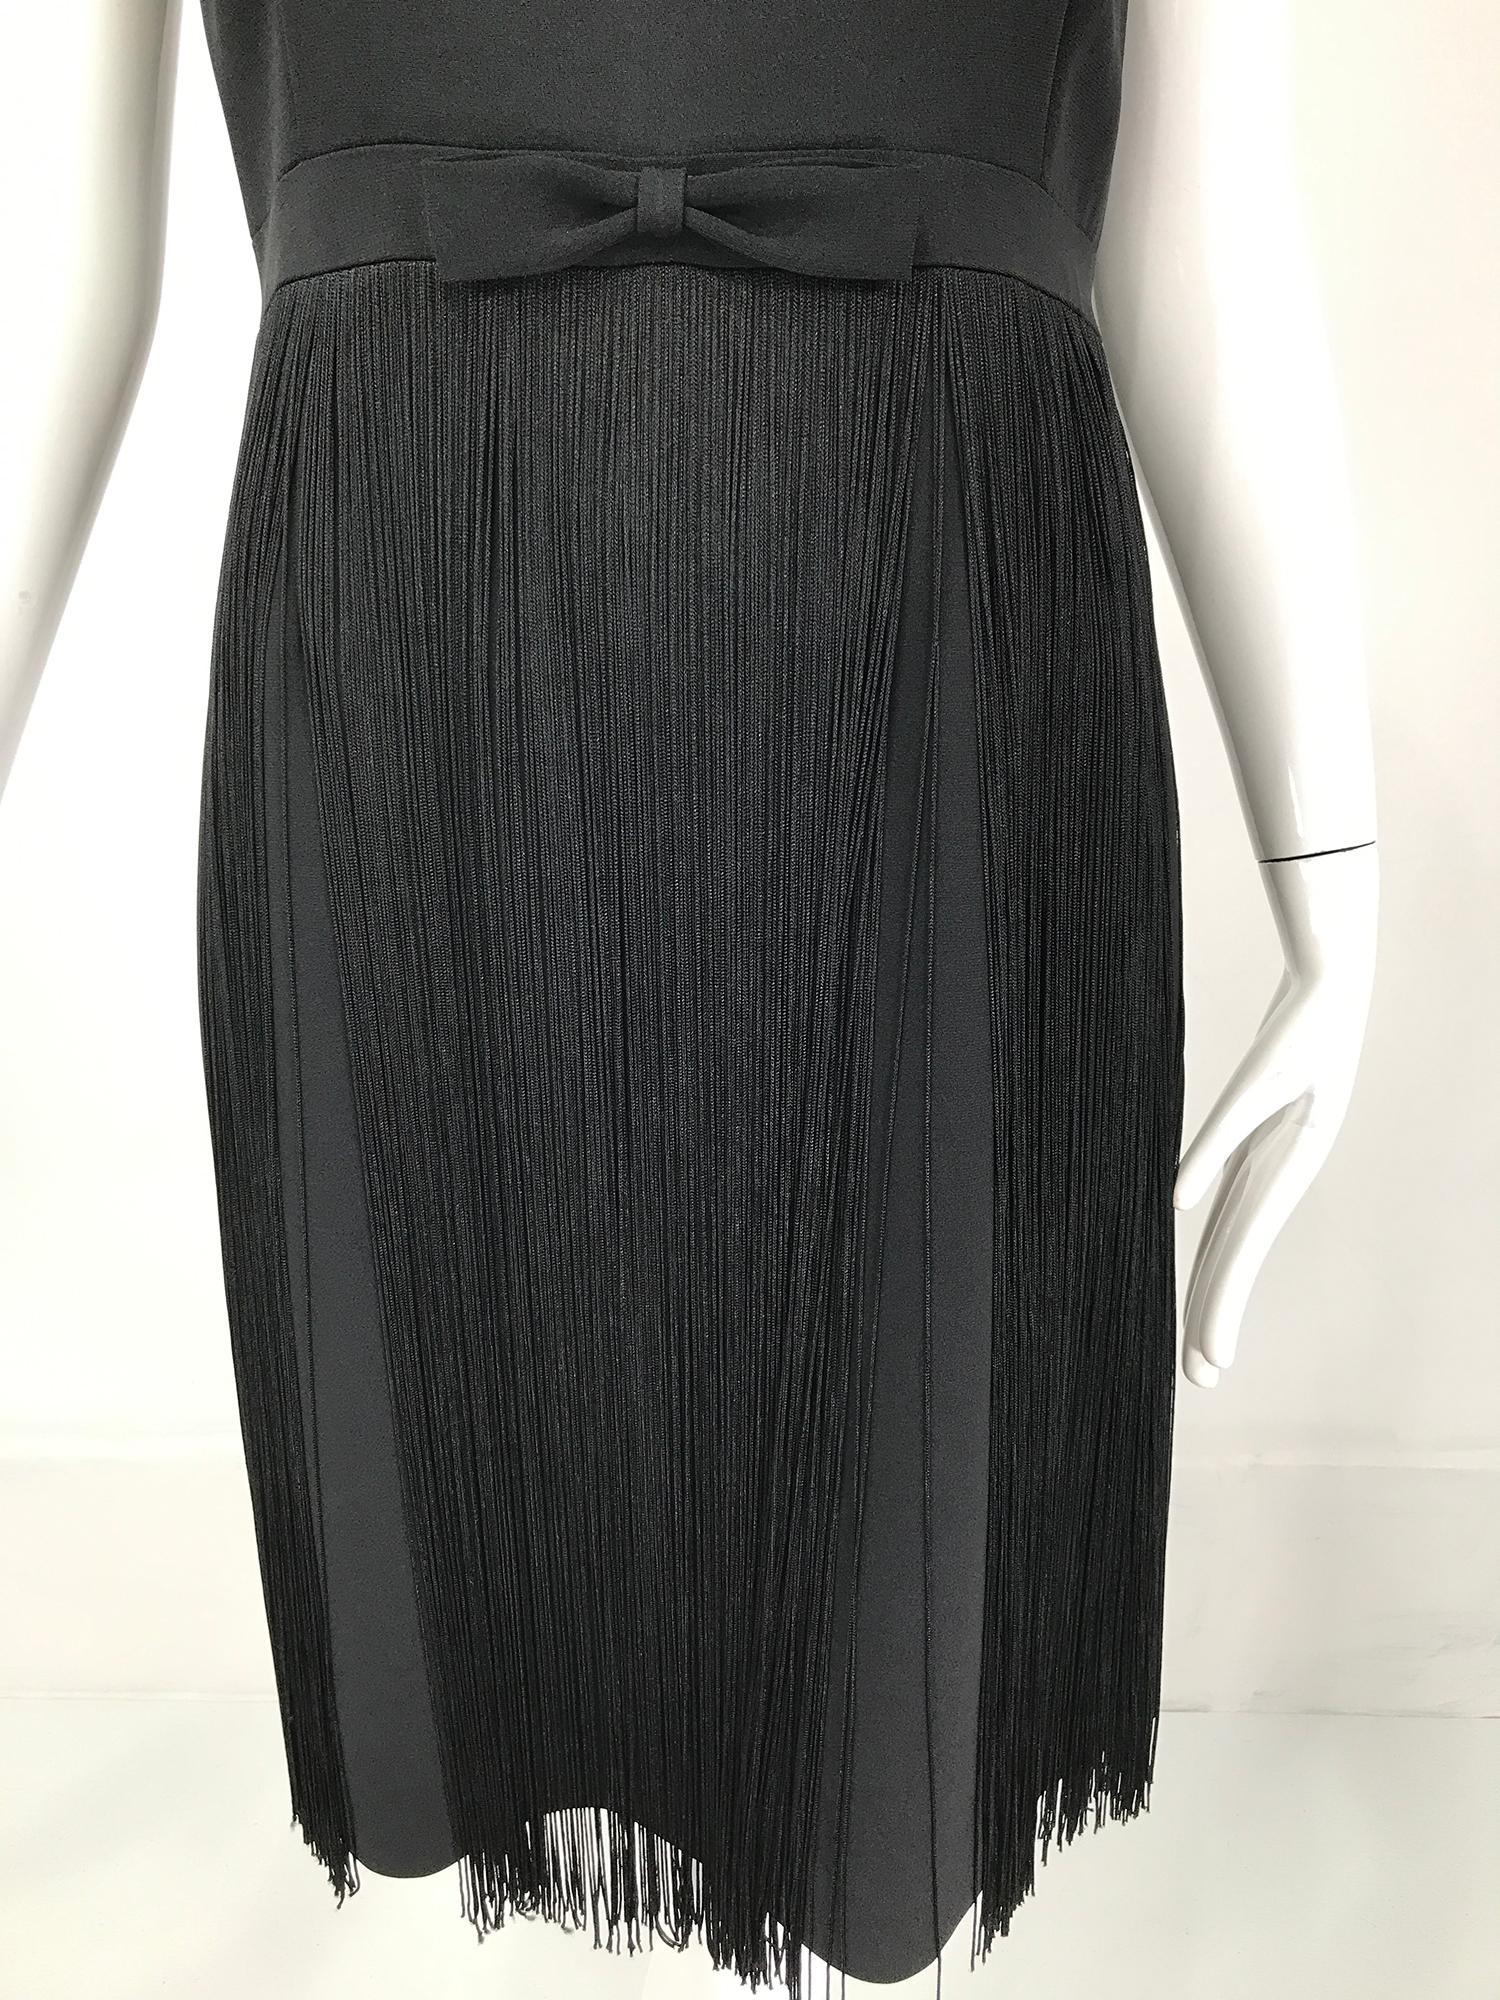 Moschino Sleeveless Black Crepe Bow Waist Fringe Skirt Dress 1990s In Good Condition For Sale In West Palm Beach, FL